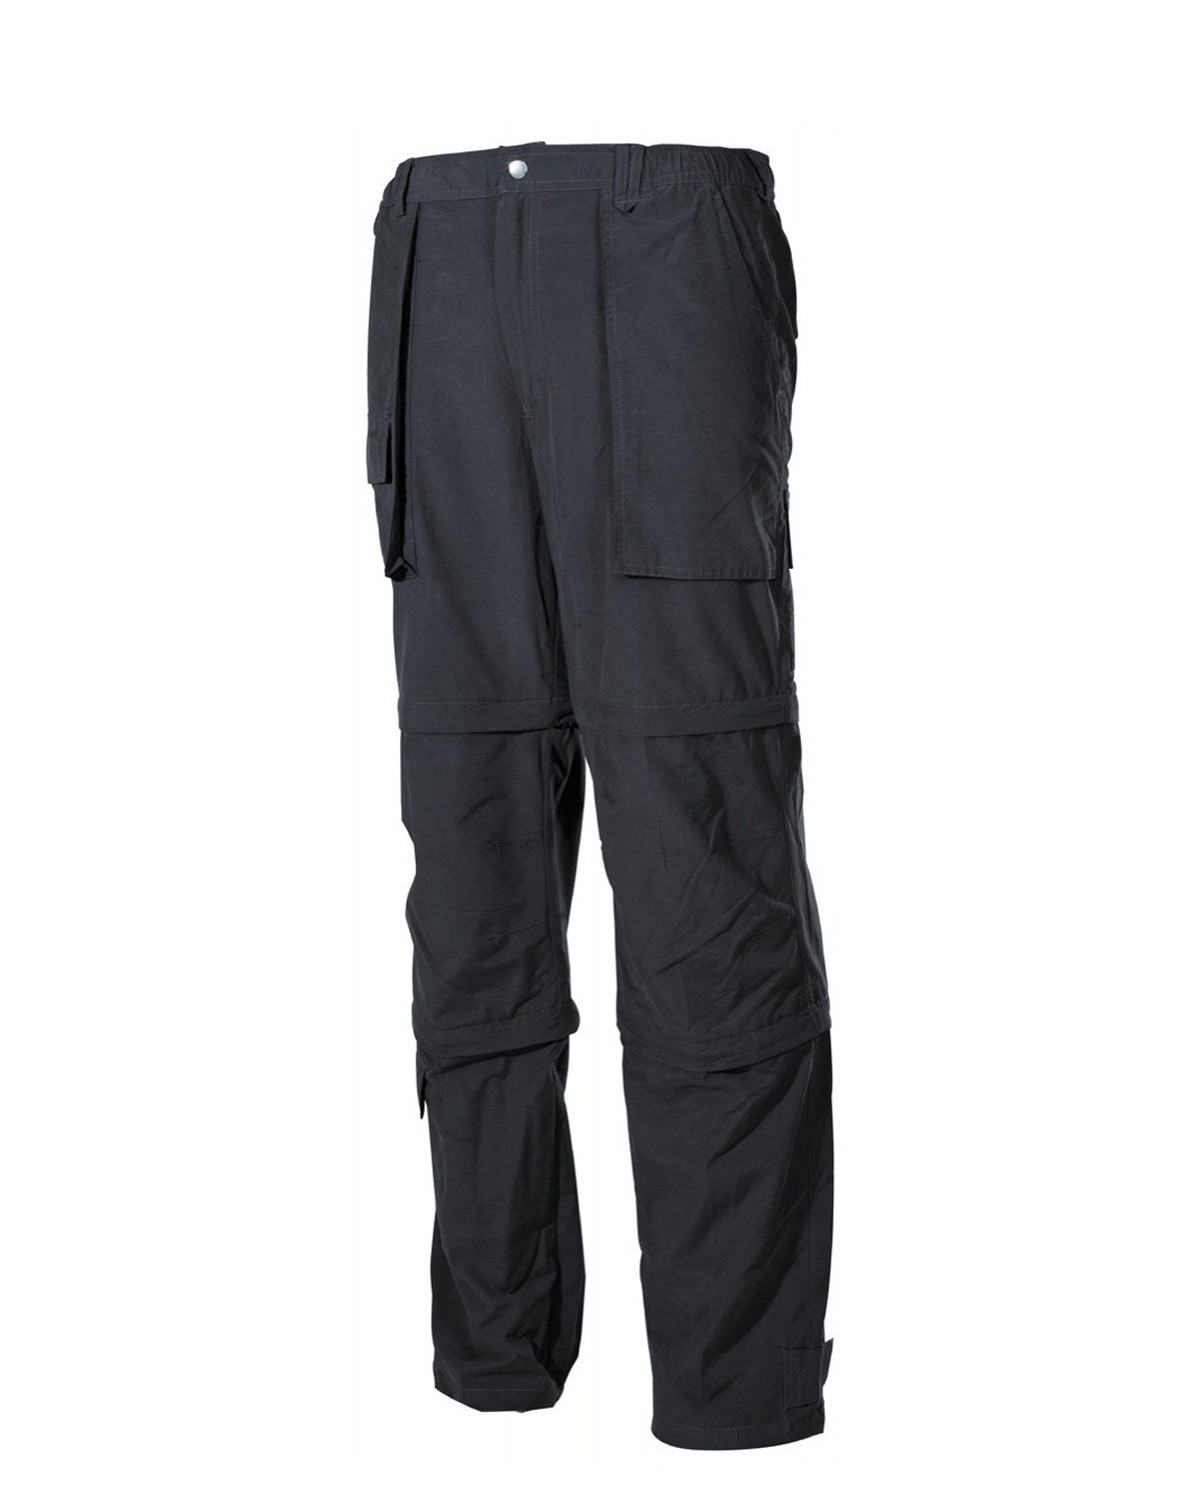 Foxoutdoor Multifunction Trousers Microfibre with side pockets 